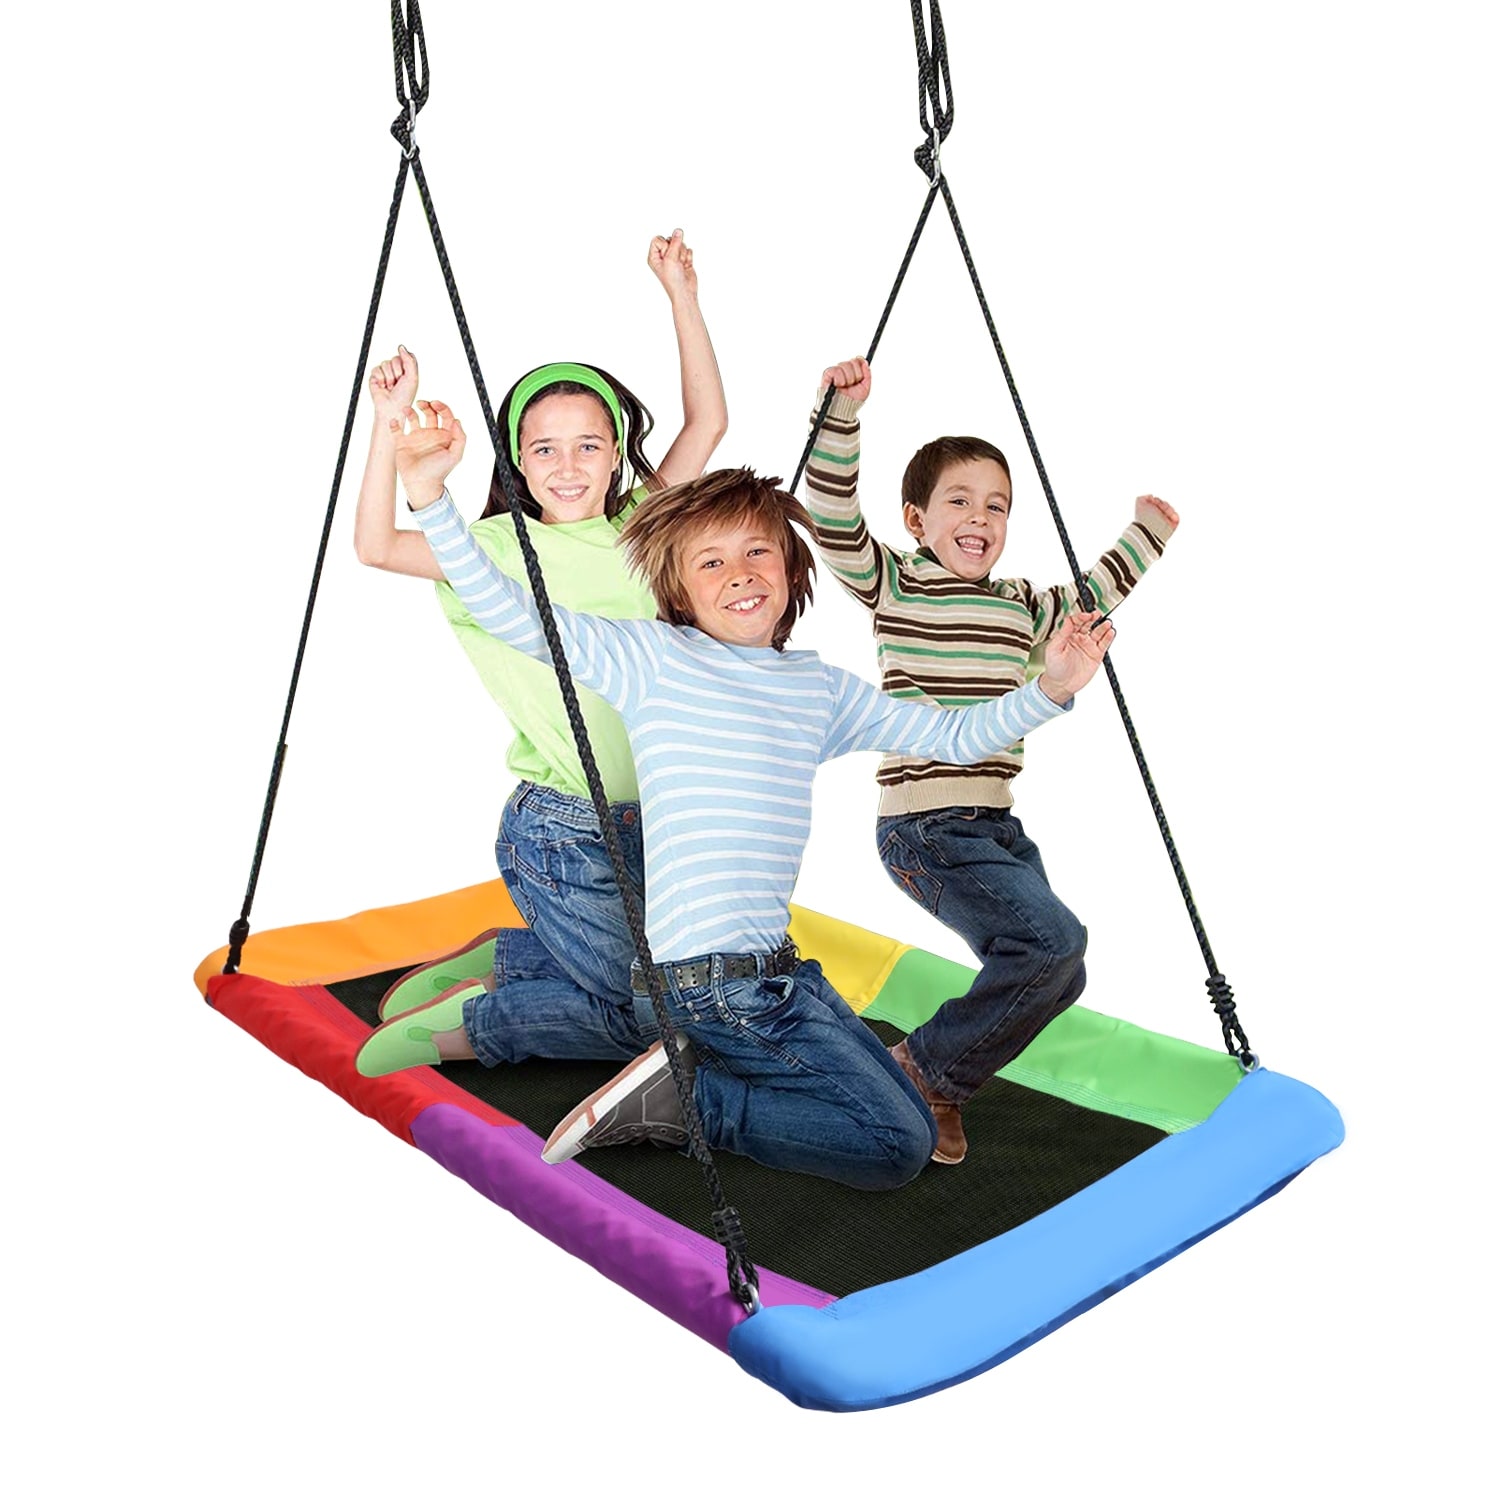 Saucer Tree Swing, Giant Outdoor Rectangle Platform Swing for Kids, Water Proof, Up to 700 lbs - Black/Rainbow